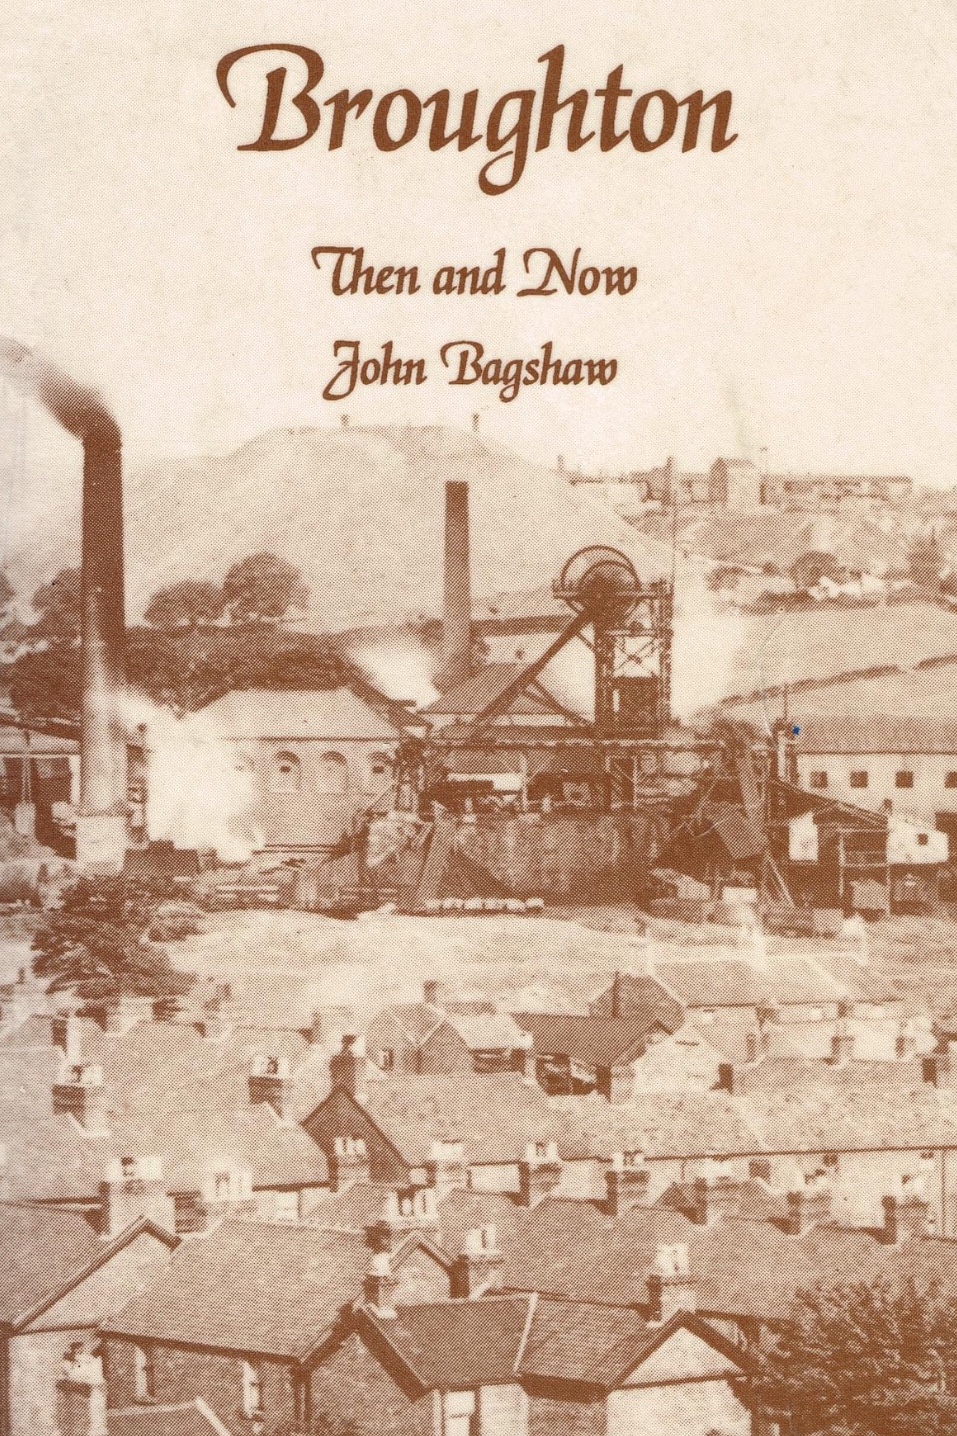 Broughton then and now book cover